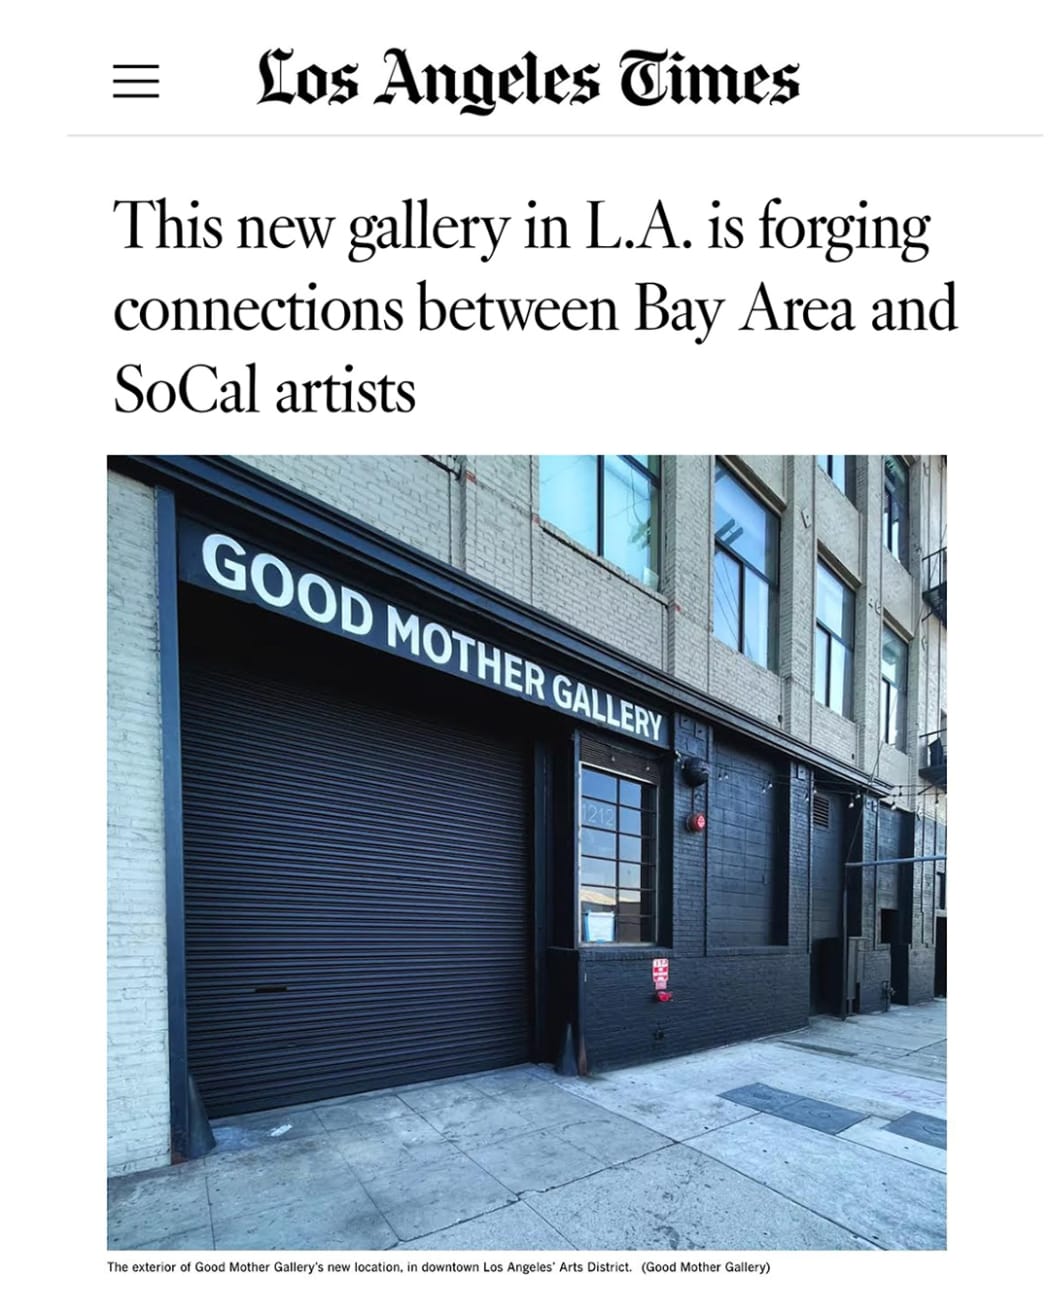 screenshot of an article heading from the Los Angeles Times featuring a photograph of the outside of Good Mother Gallery